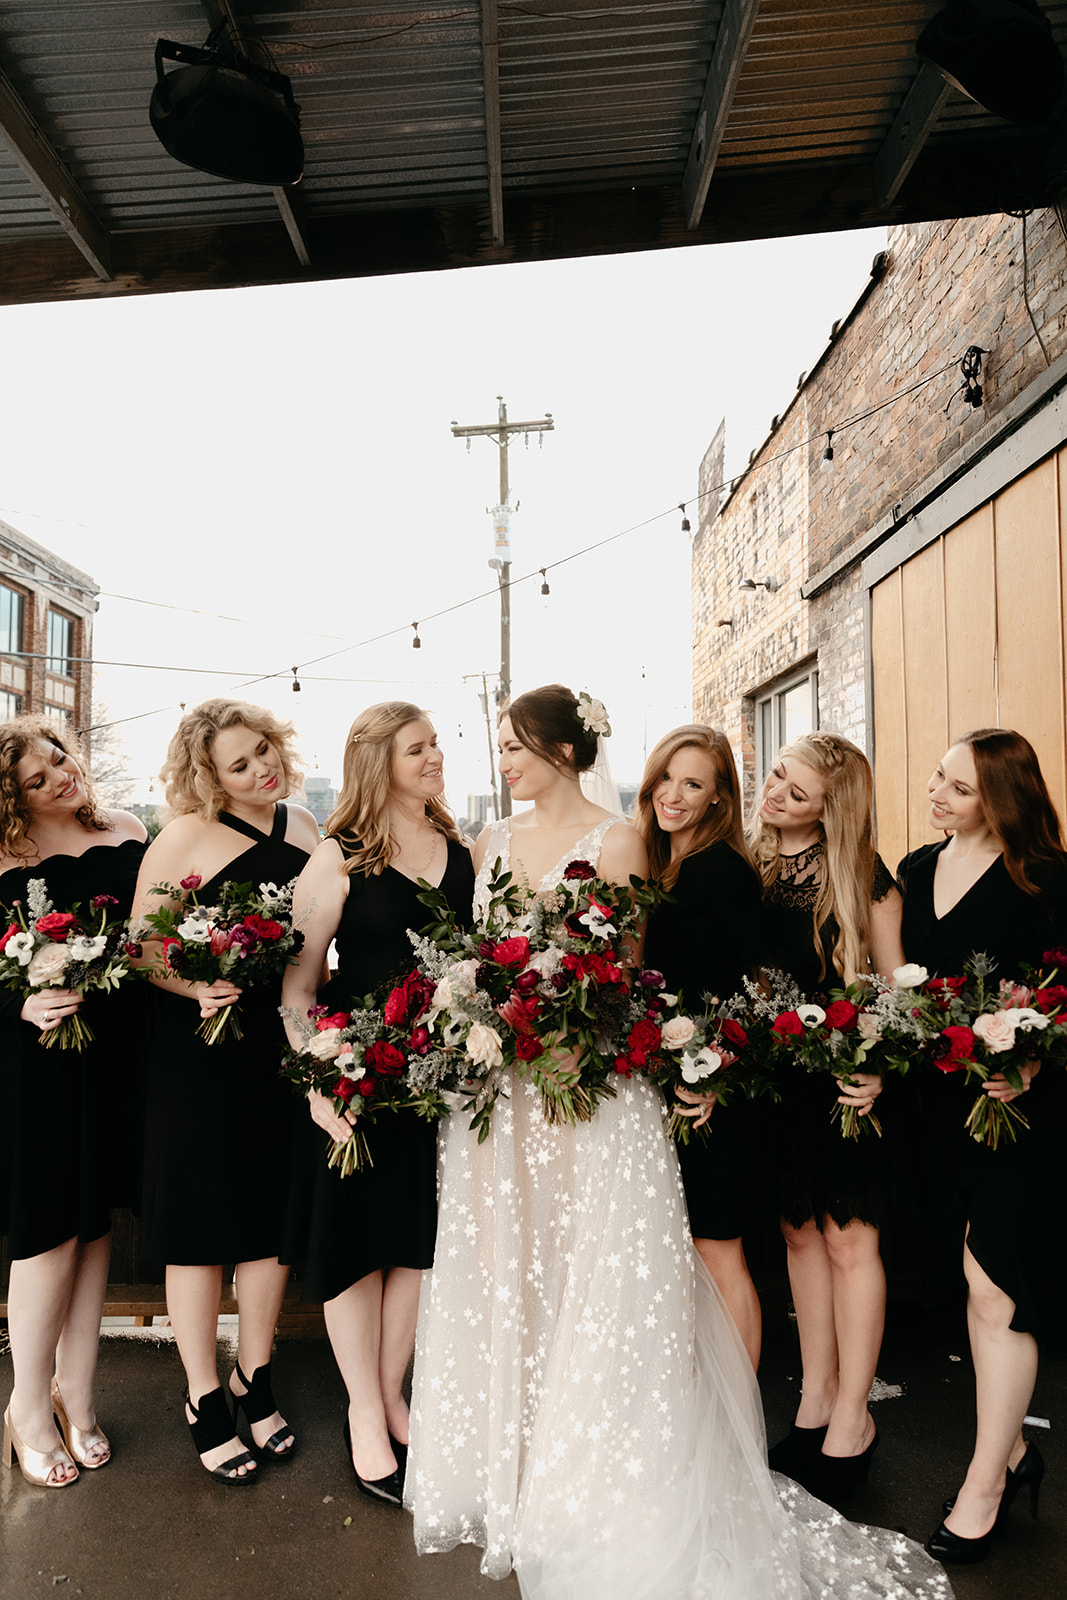 Black bridesmaid dresses with jewel tone and greenery bouquets in a natural, garden-inspired floral style. Nashville Wedding Florist.